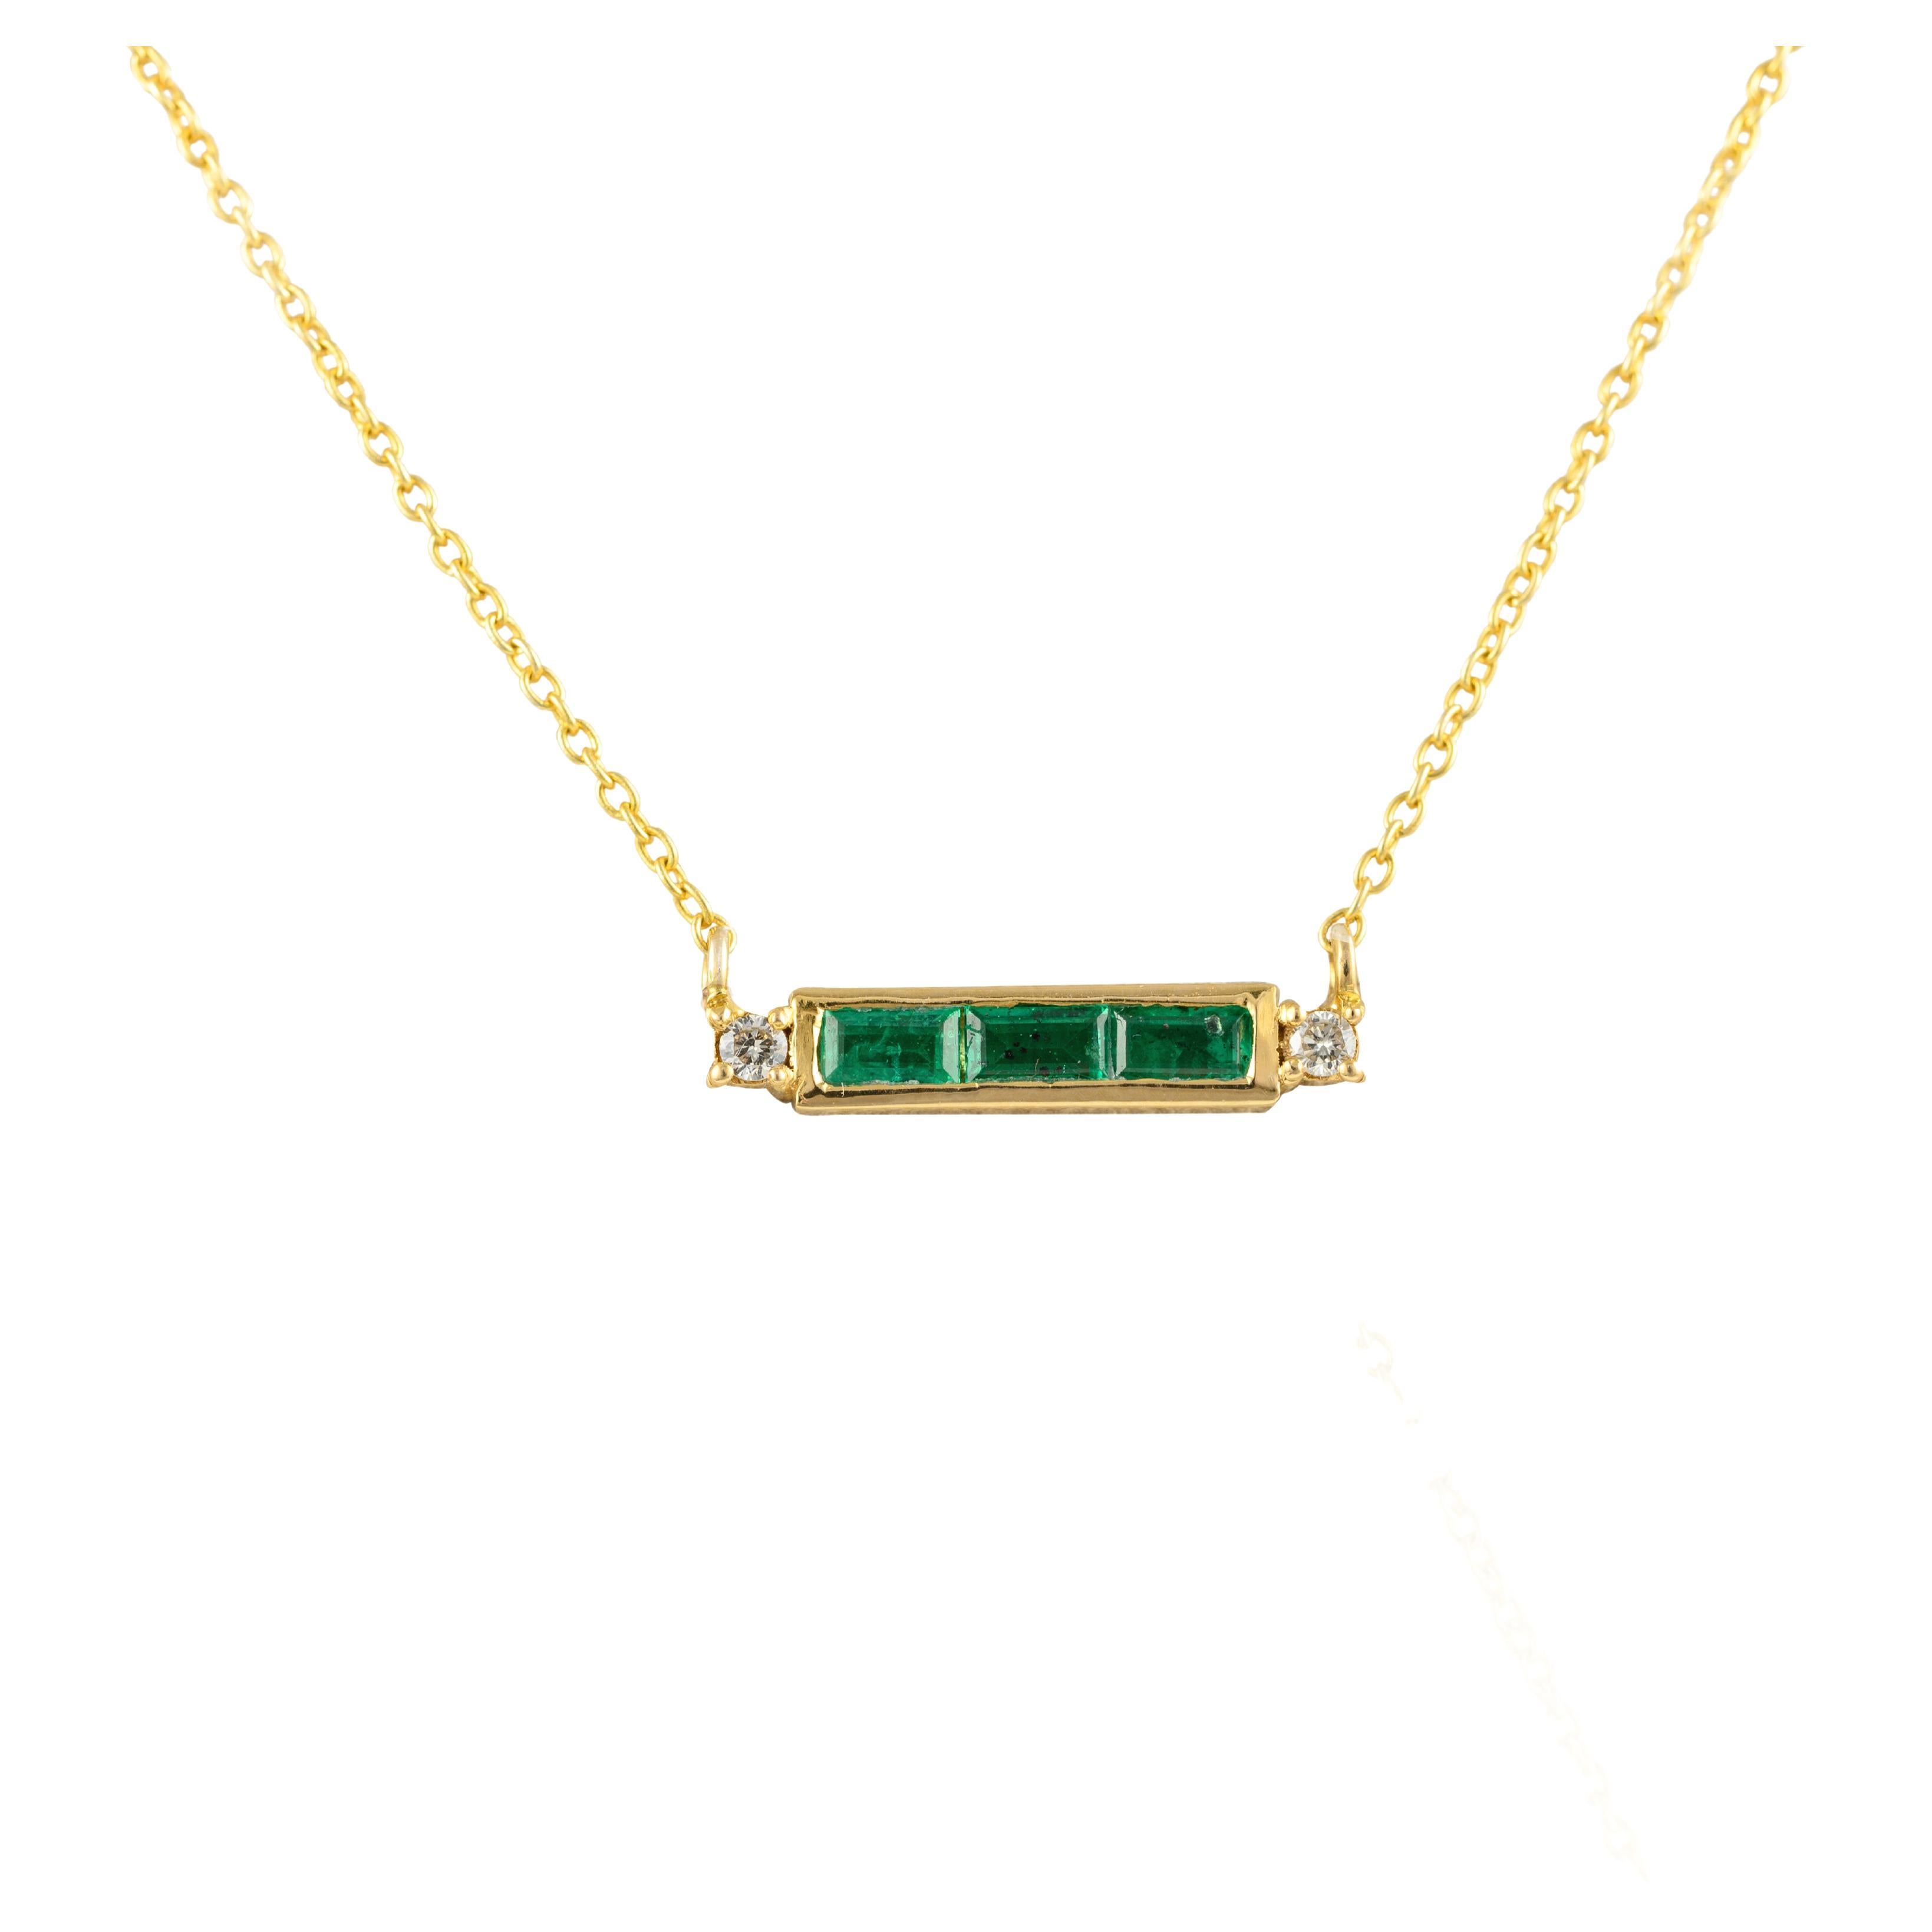 14k Solid Yellow Gold Diamond Emerald Baguette Bar Necklace, Thank You Gift